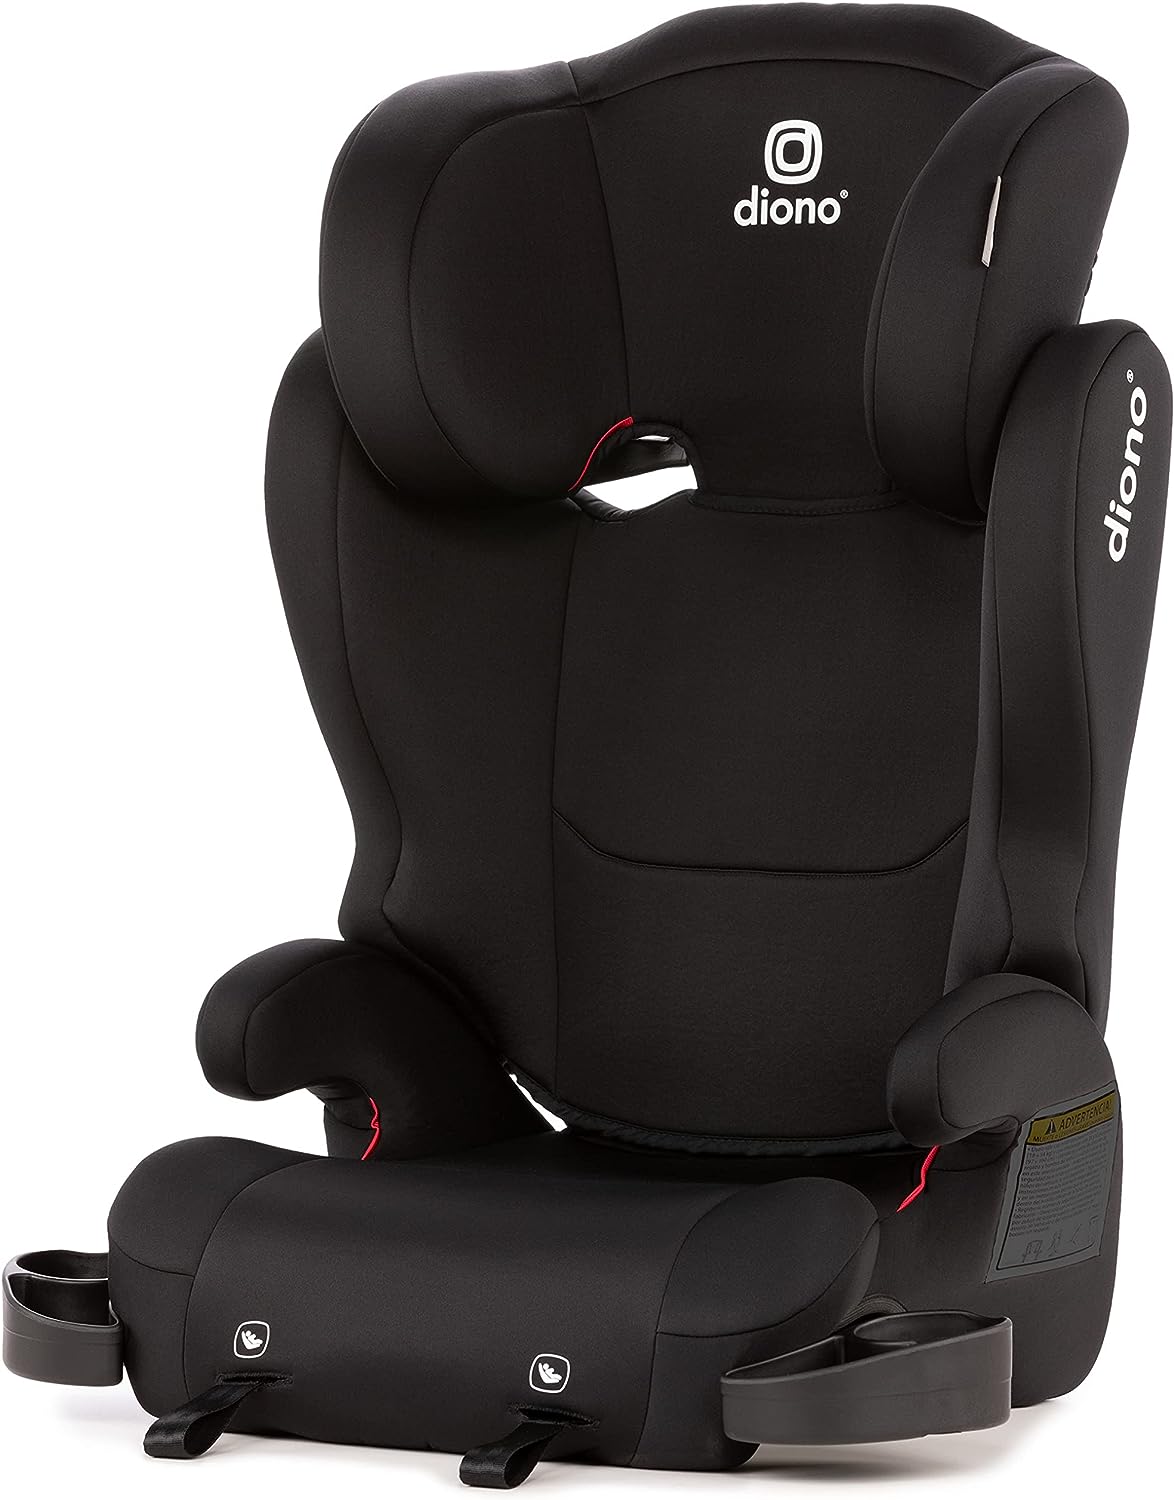 Diono Cambria 2 XL 2022, 2-in-1 Belt Positioning Booster Seat, High-Back to Backless Booster with Space and Room to Grow, 8 Years 1 Booster Seat, Black